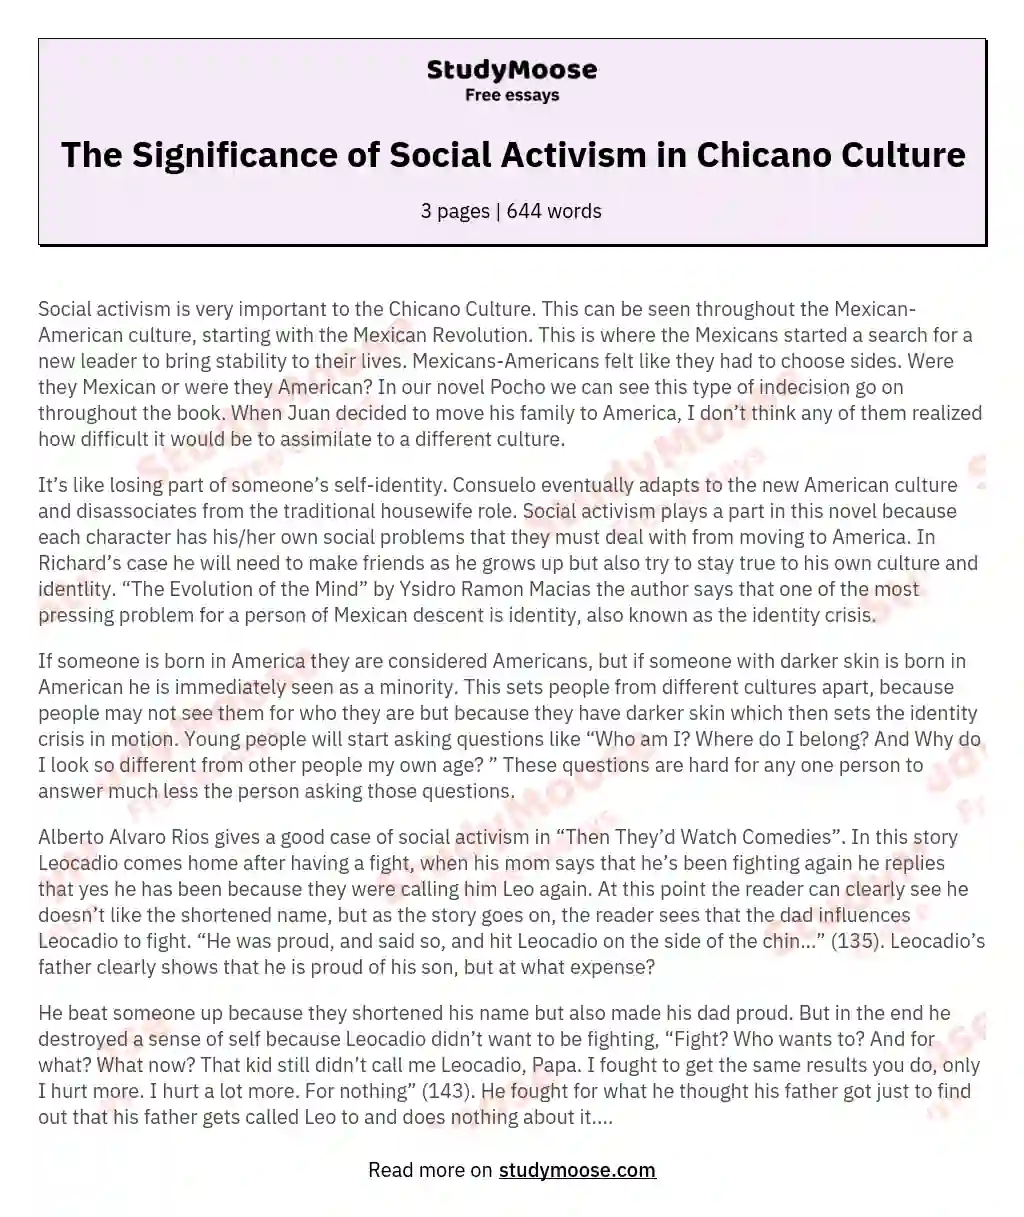 The Significance of Social Activism in Chicano Culture essay